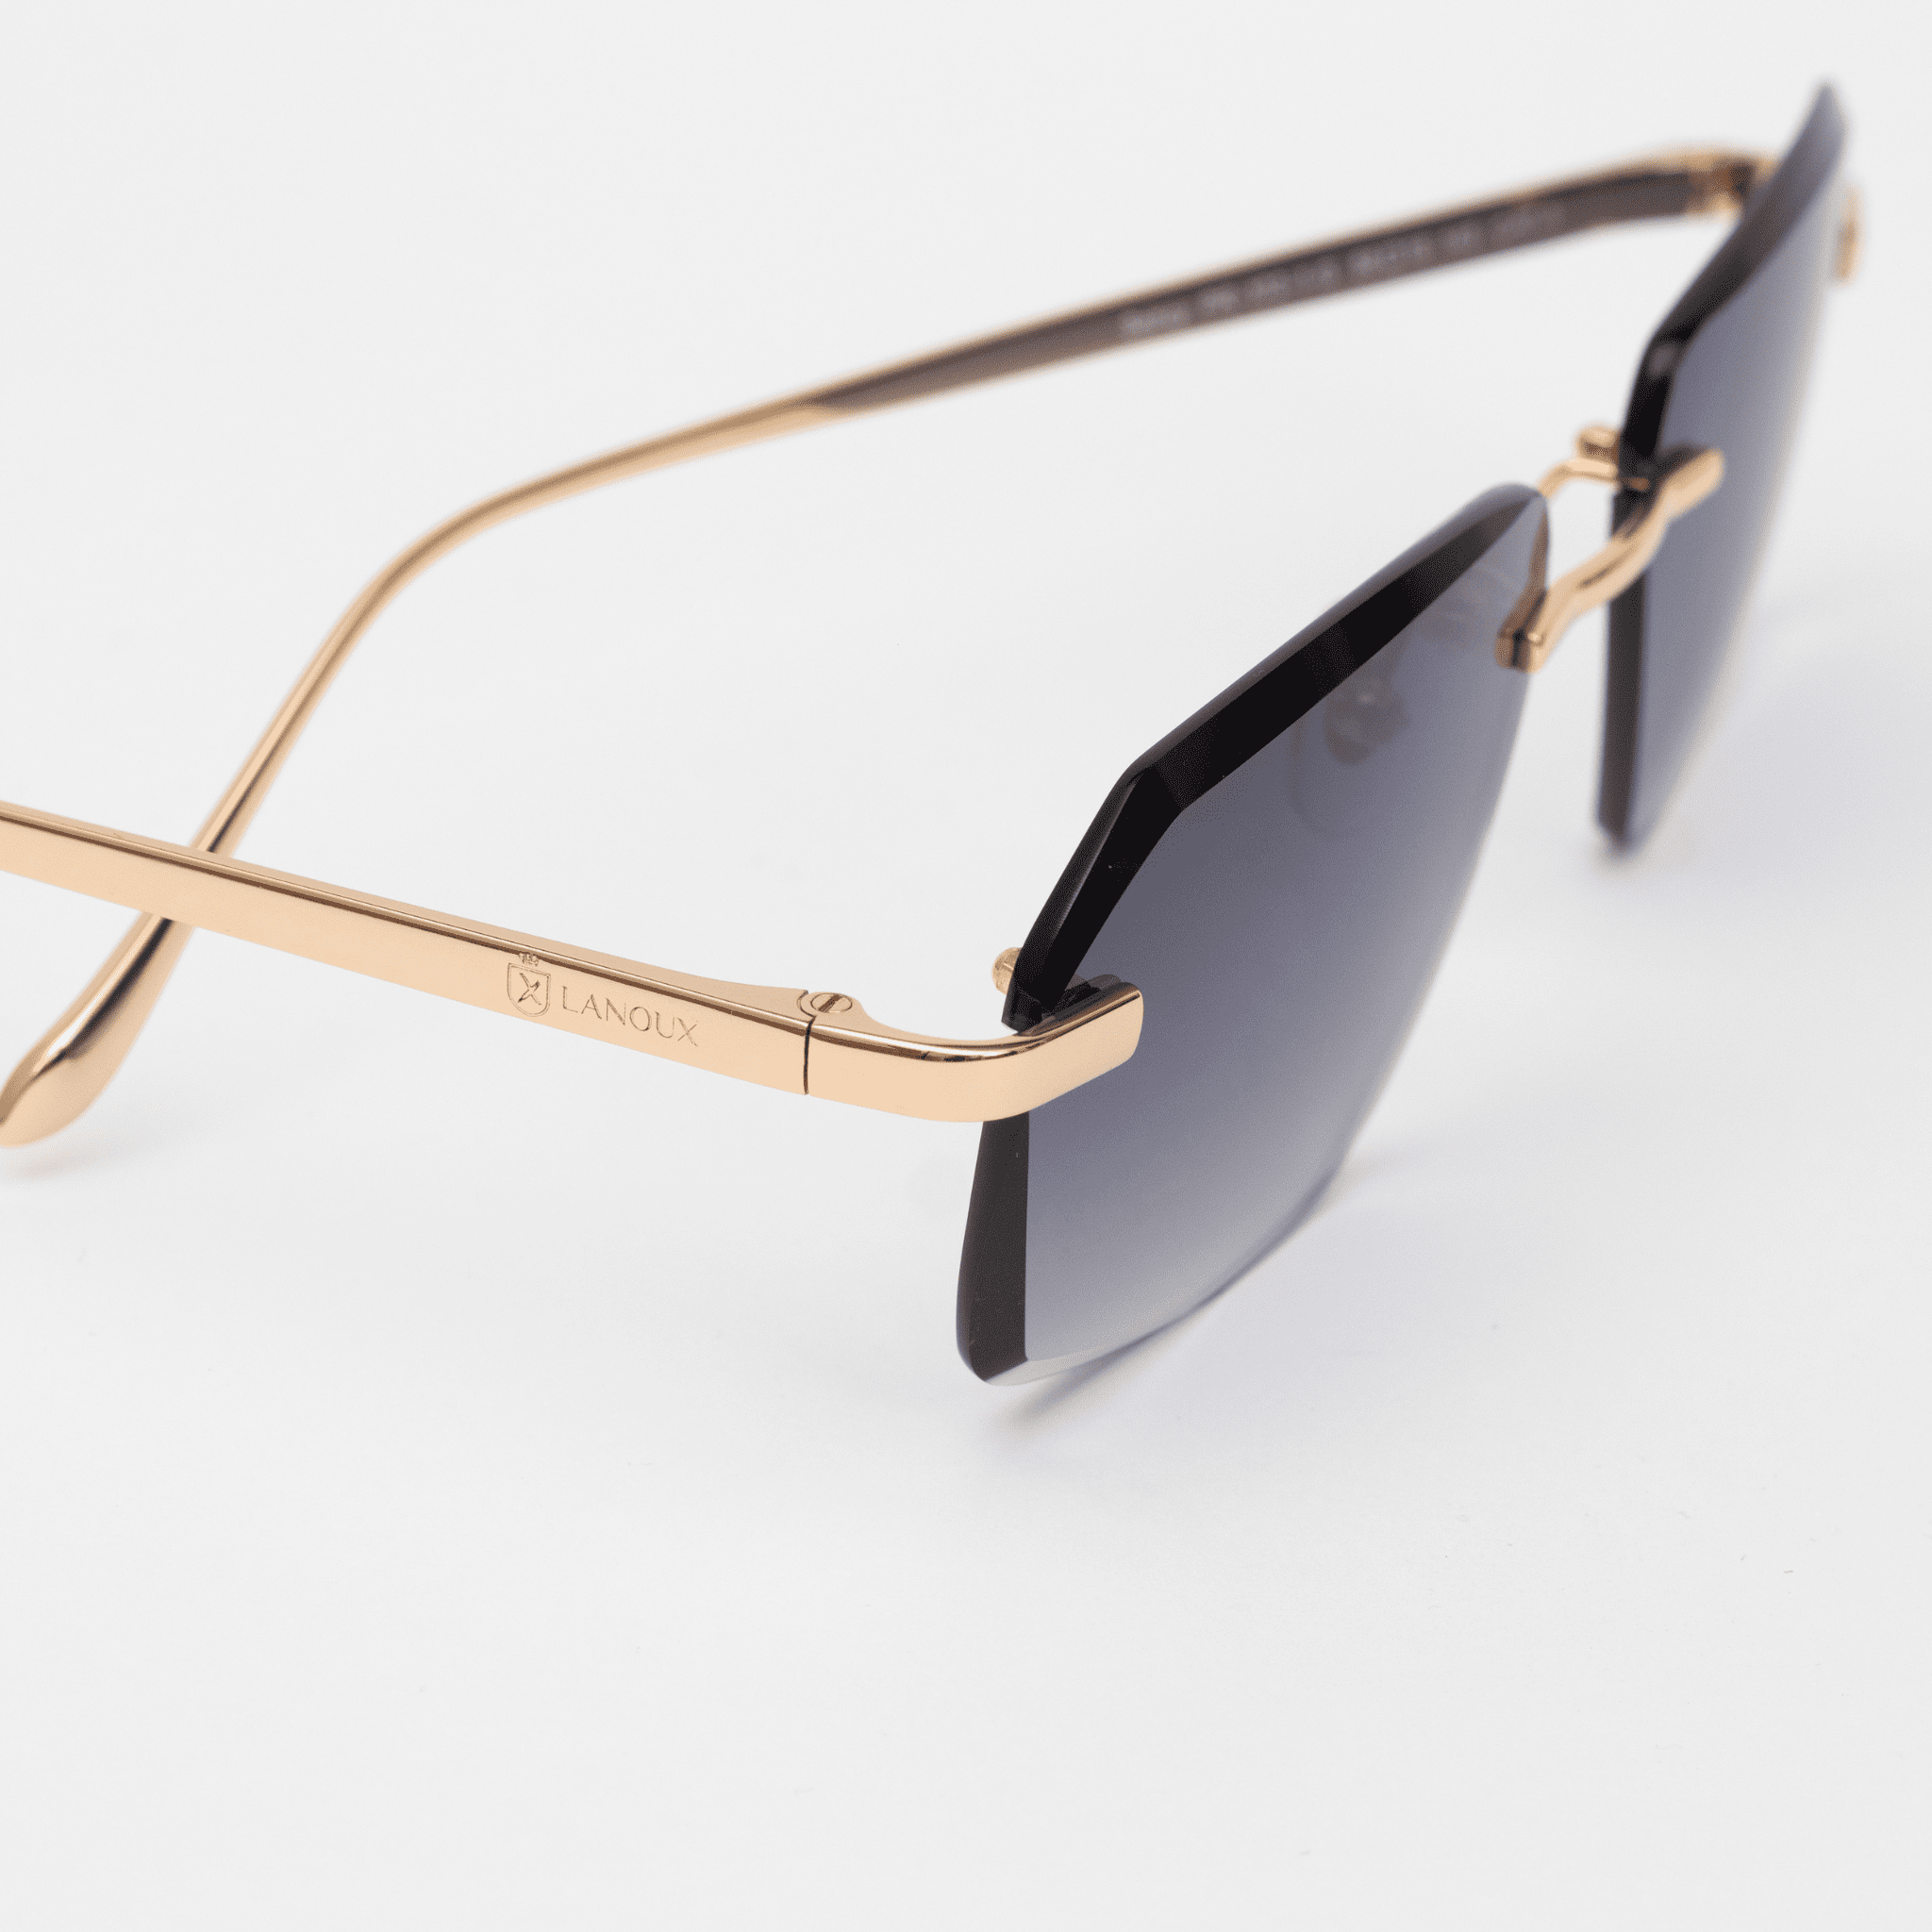 Close-up view of the Model Sancy sunglasses showing the detailed craftsmanship of the rose gold temple with the 'LANOUX' logo and the grey diamond-cut rimless lenses, set against a white surface.